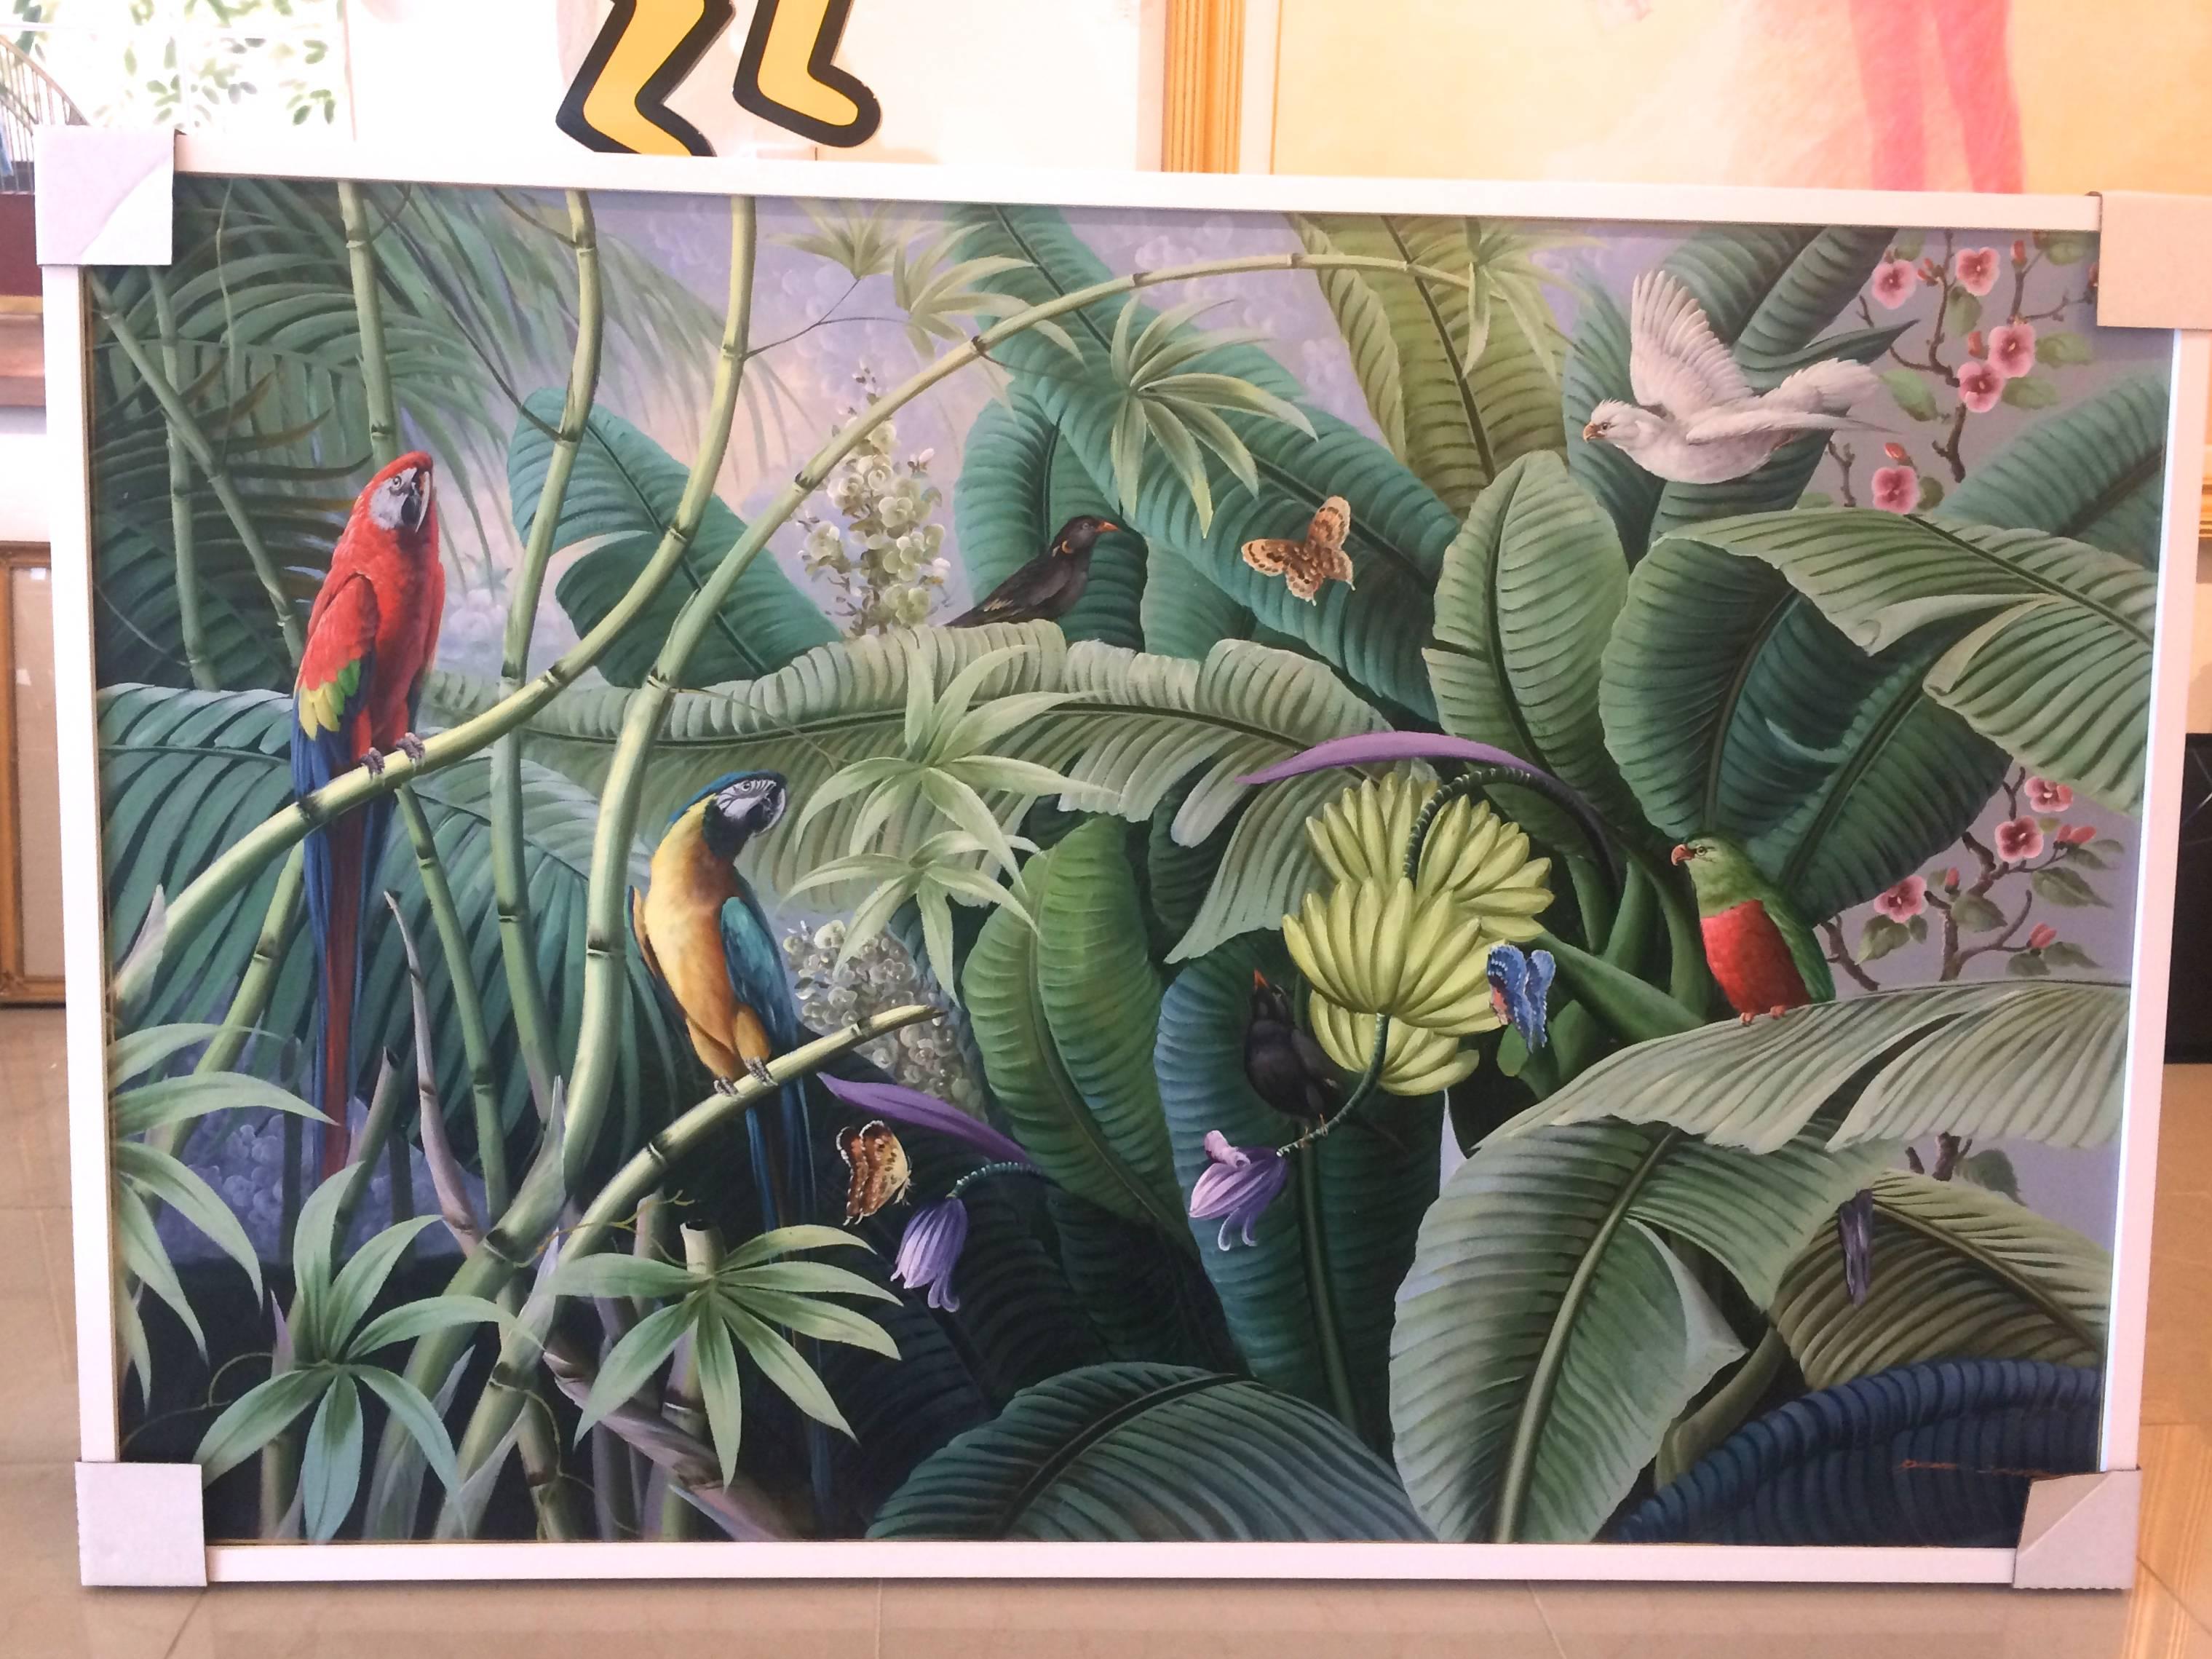 Size: 40x60 framed 42x62x2
Large and beautiful landscape from the 1980's with parrots, butterflies, palm trees in a tropical setting. Signed lower right.